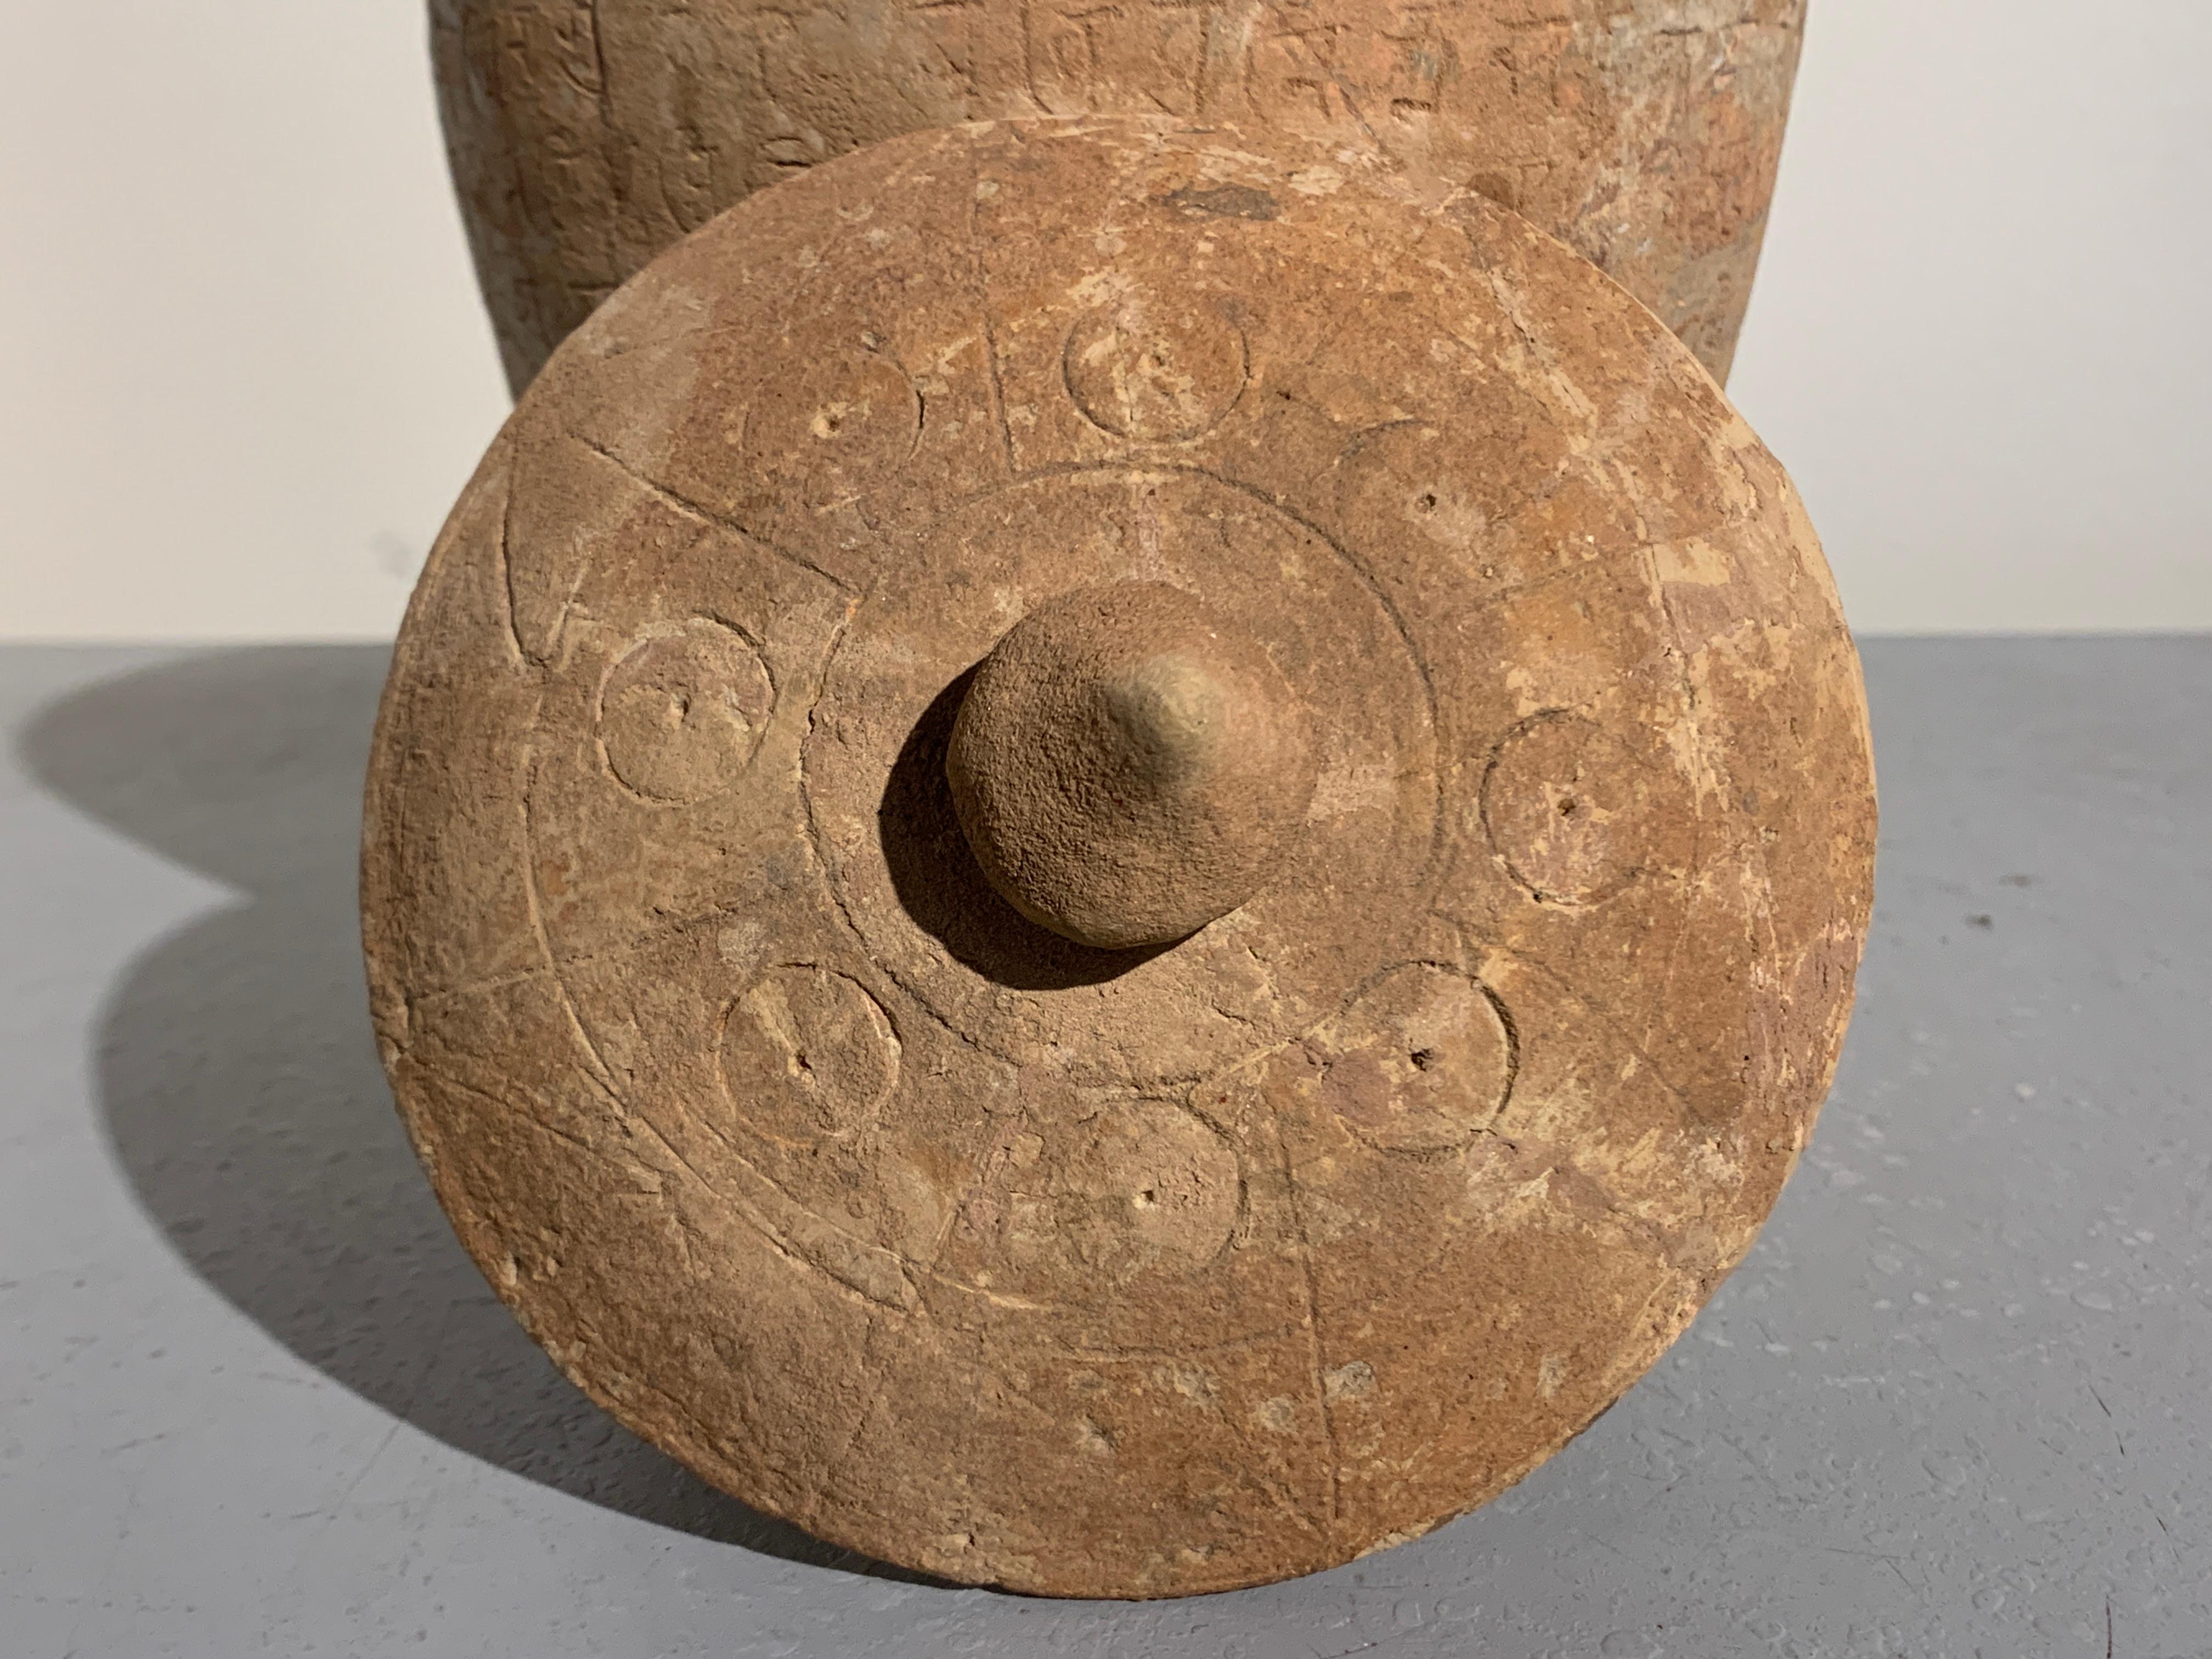 Terracotta Song Dynasty Pottery Jar with Sanskrit Inscriptions, 11th/12th Century, China